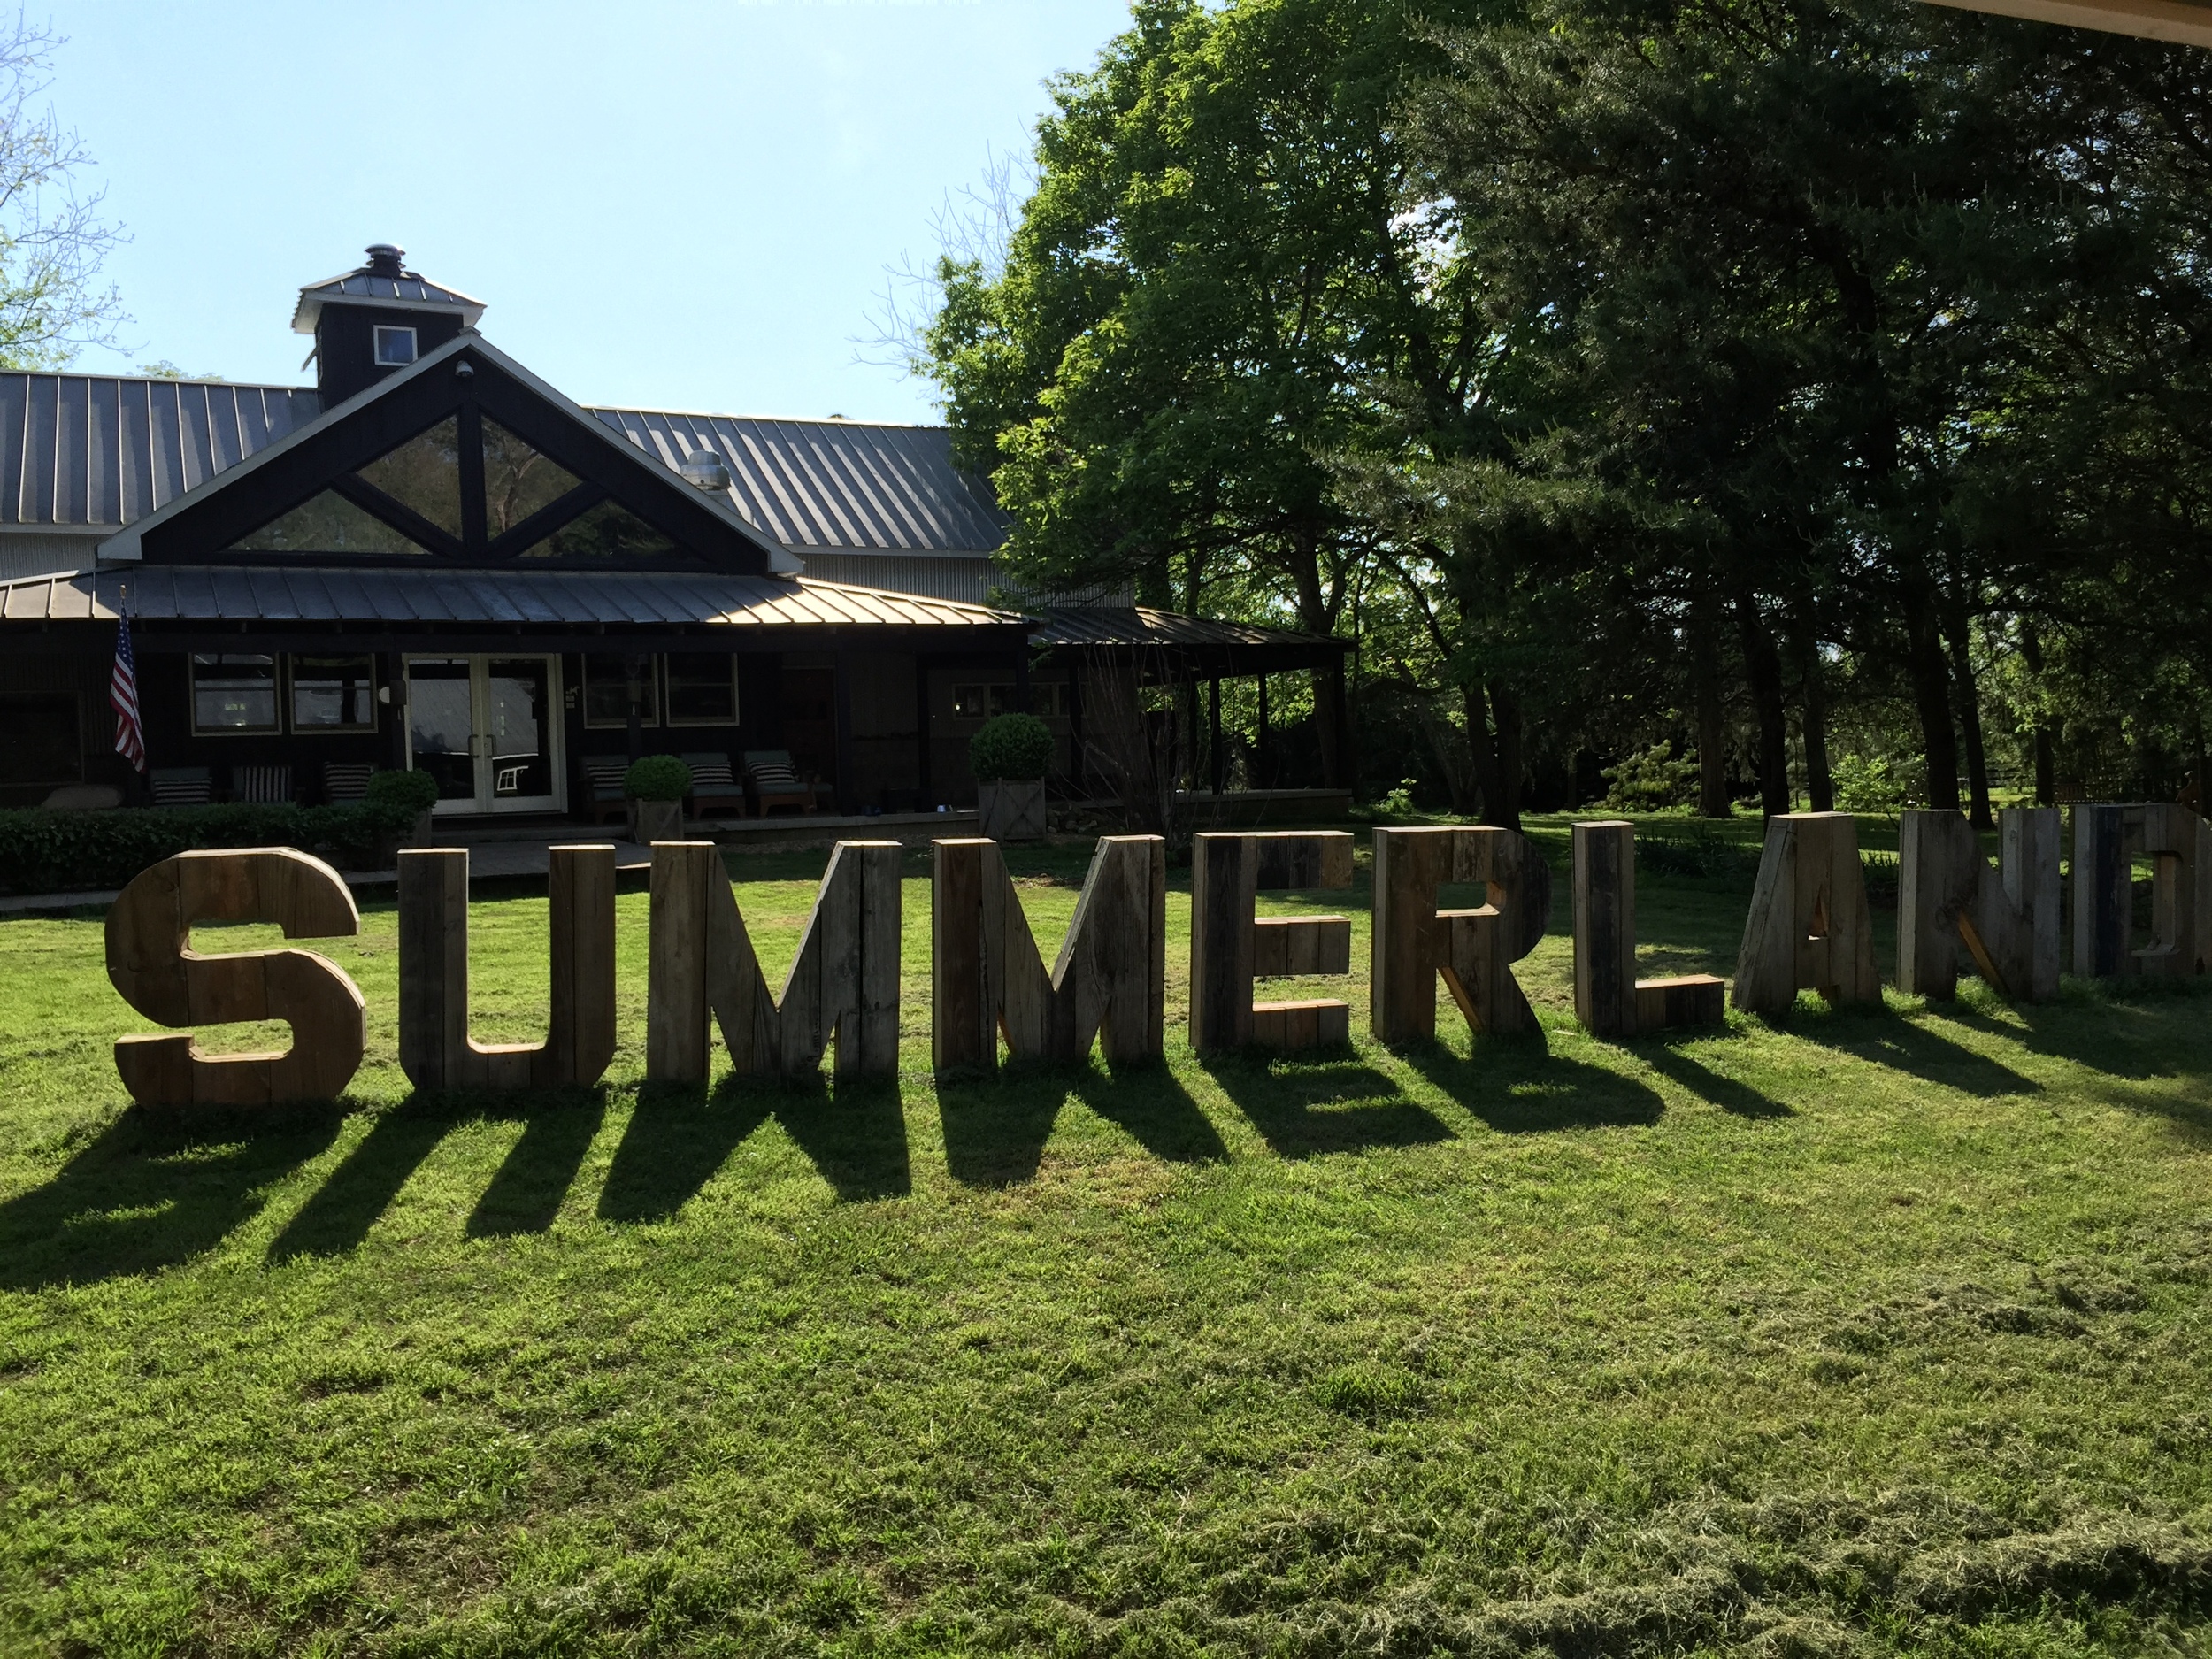 Wood block letters spelling out Summerland in front of building